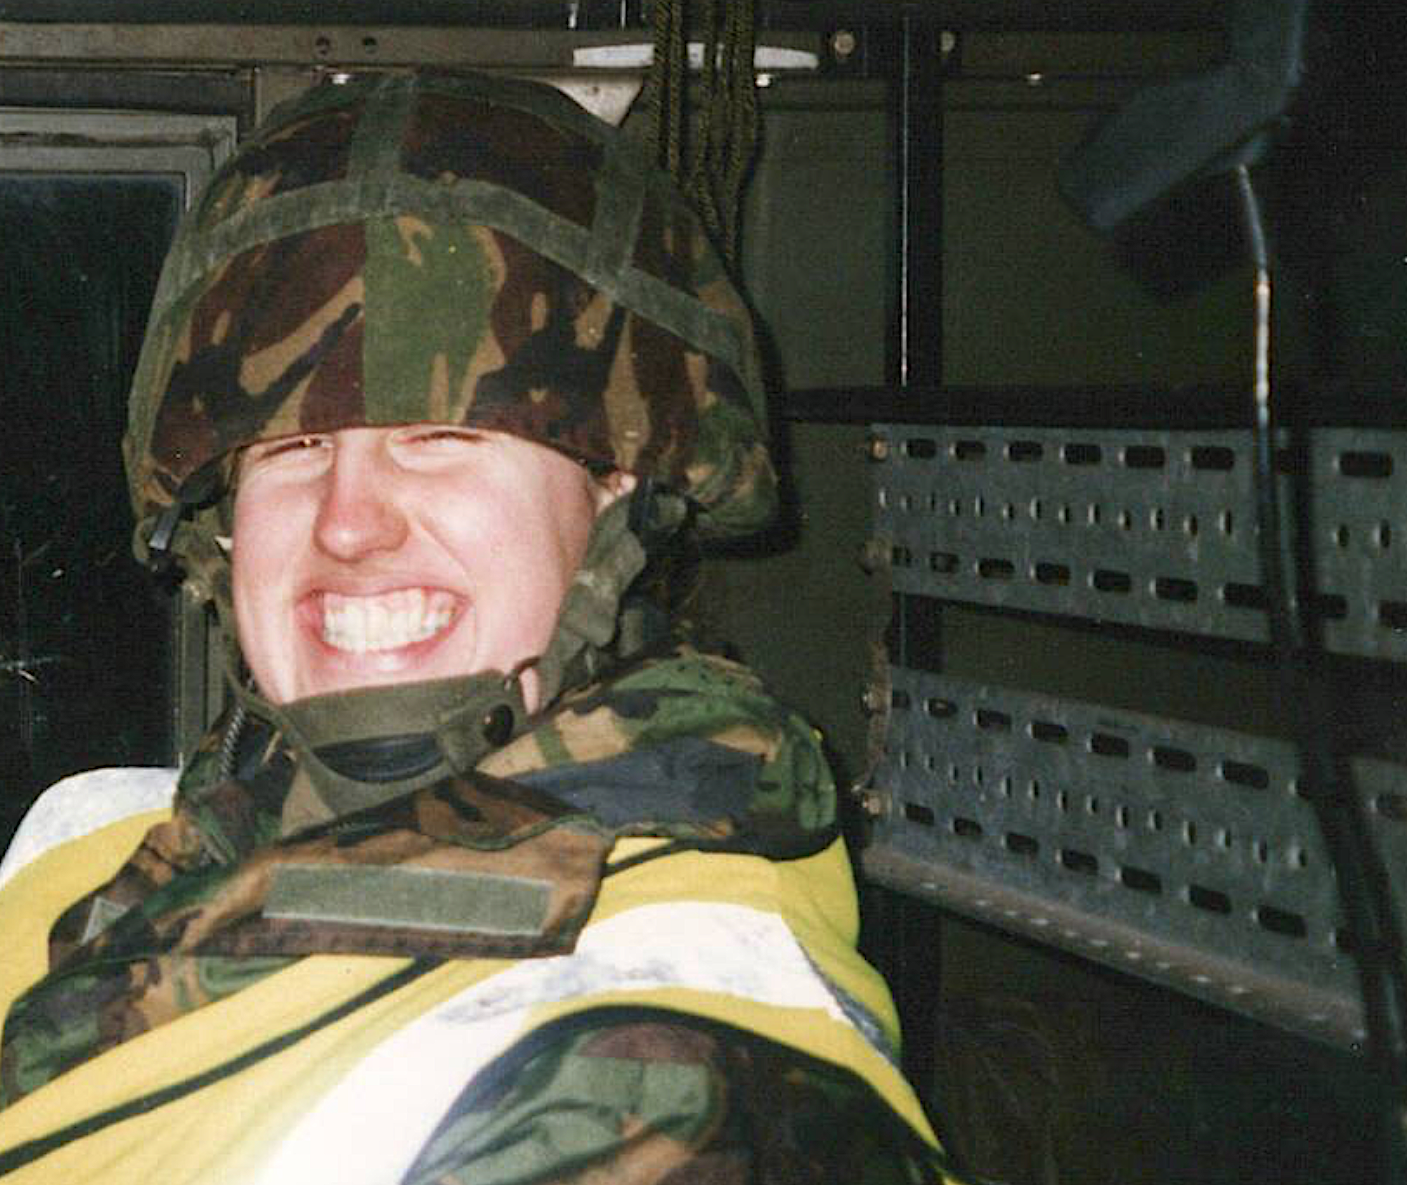 Kate Green in the Army